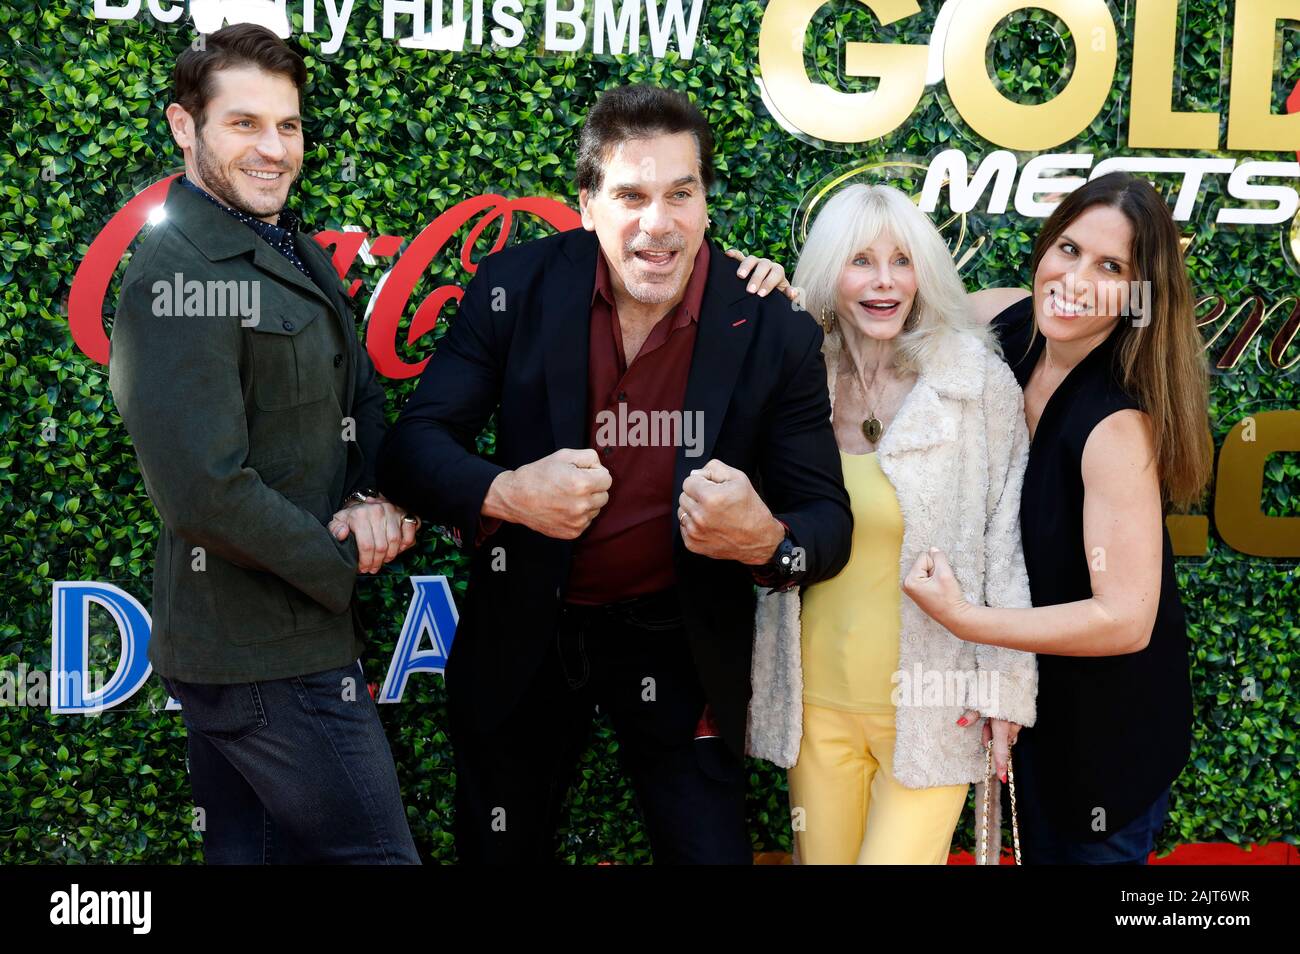 Los Angeles, USA. 04th Jan, 2020. Lou Ferrigno Jr., Lou Ferrigno, Carla Ferrigno and Shanna Ferrigno attending the 7th Annual Gold Meets Golden Event 2020 at the Virginia Robinson Gardens and Estate on January 4, 2020 in Los Angeles, California. Credit: Geisler-Fotopress GmbH/Alamy Live News Stock Photo